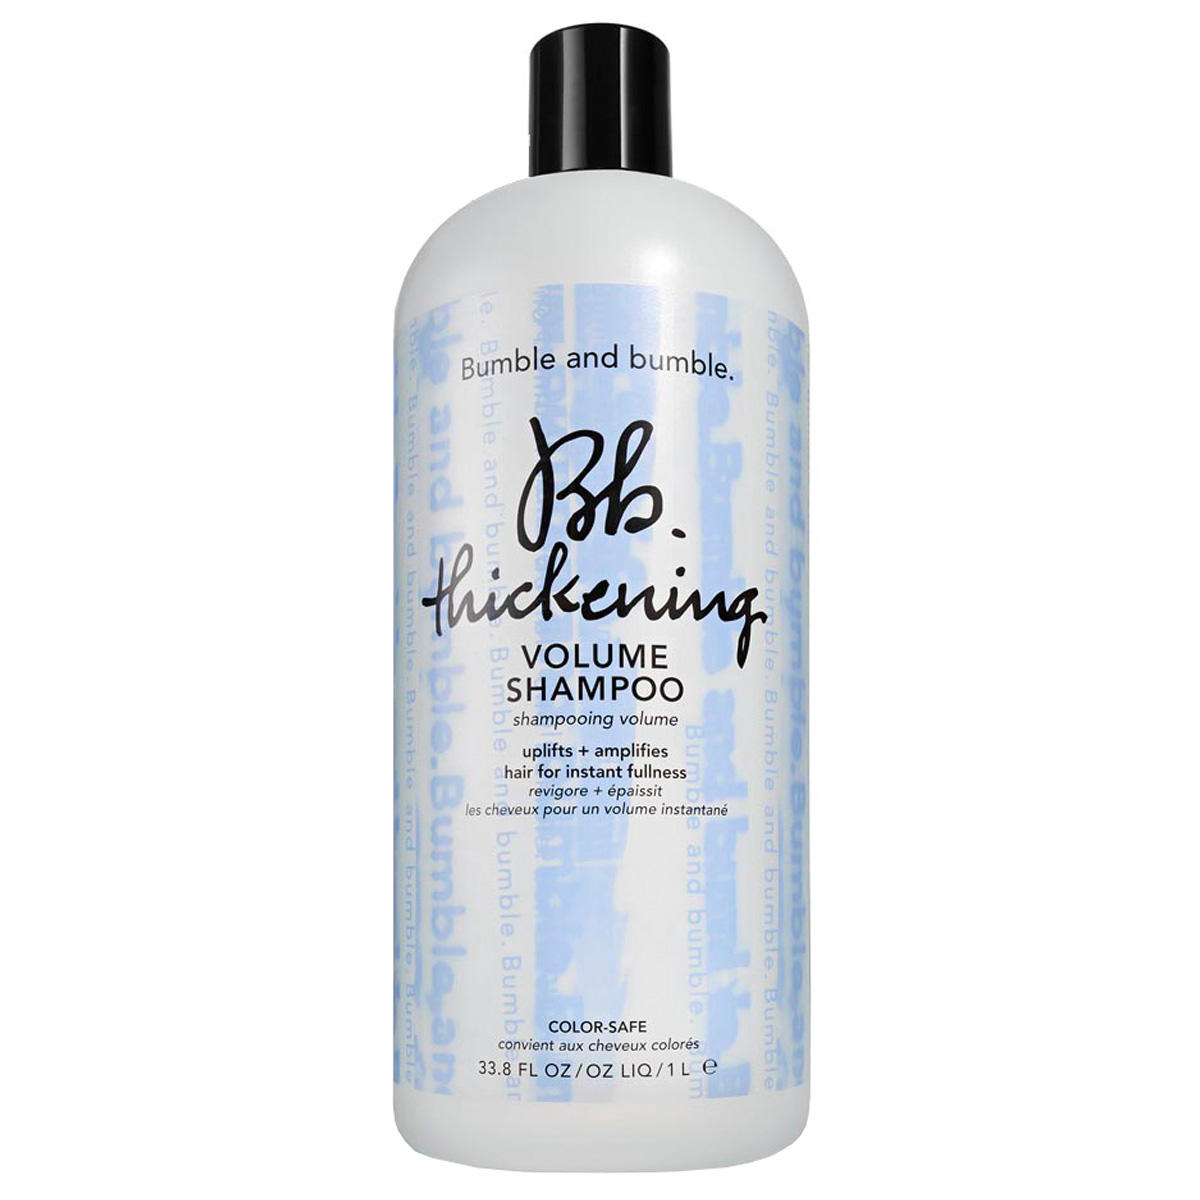 Bumble and bumble Bb. Thickening Volume Shampoo 1000 ml - 1